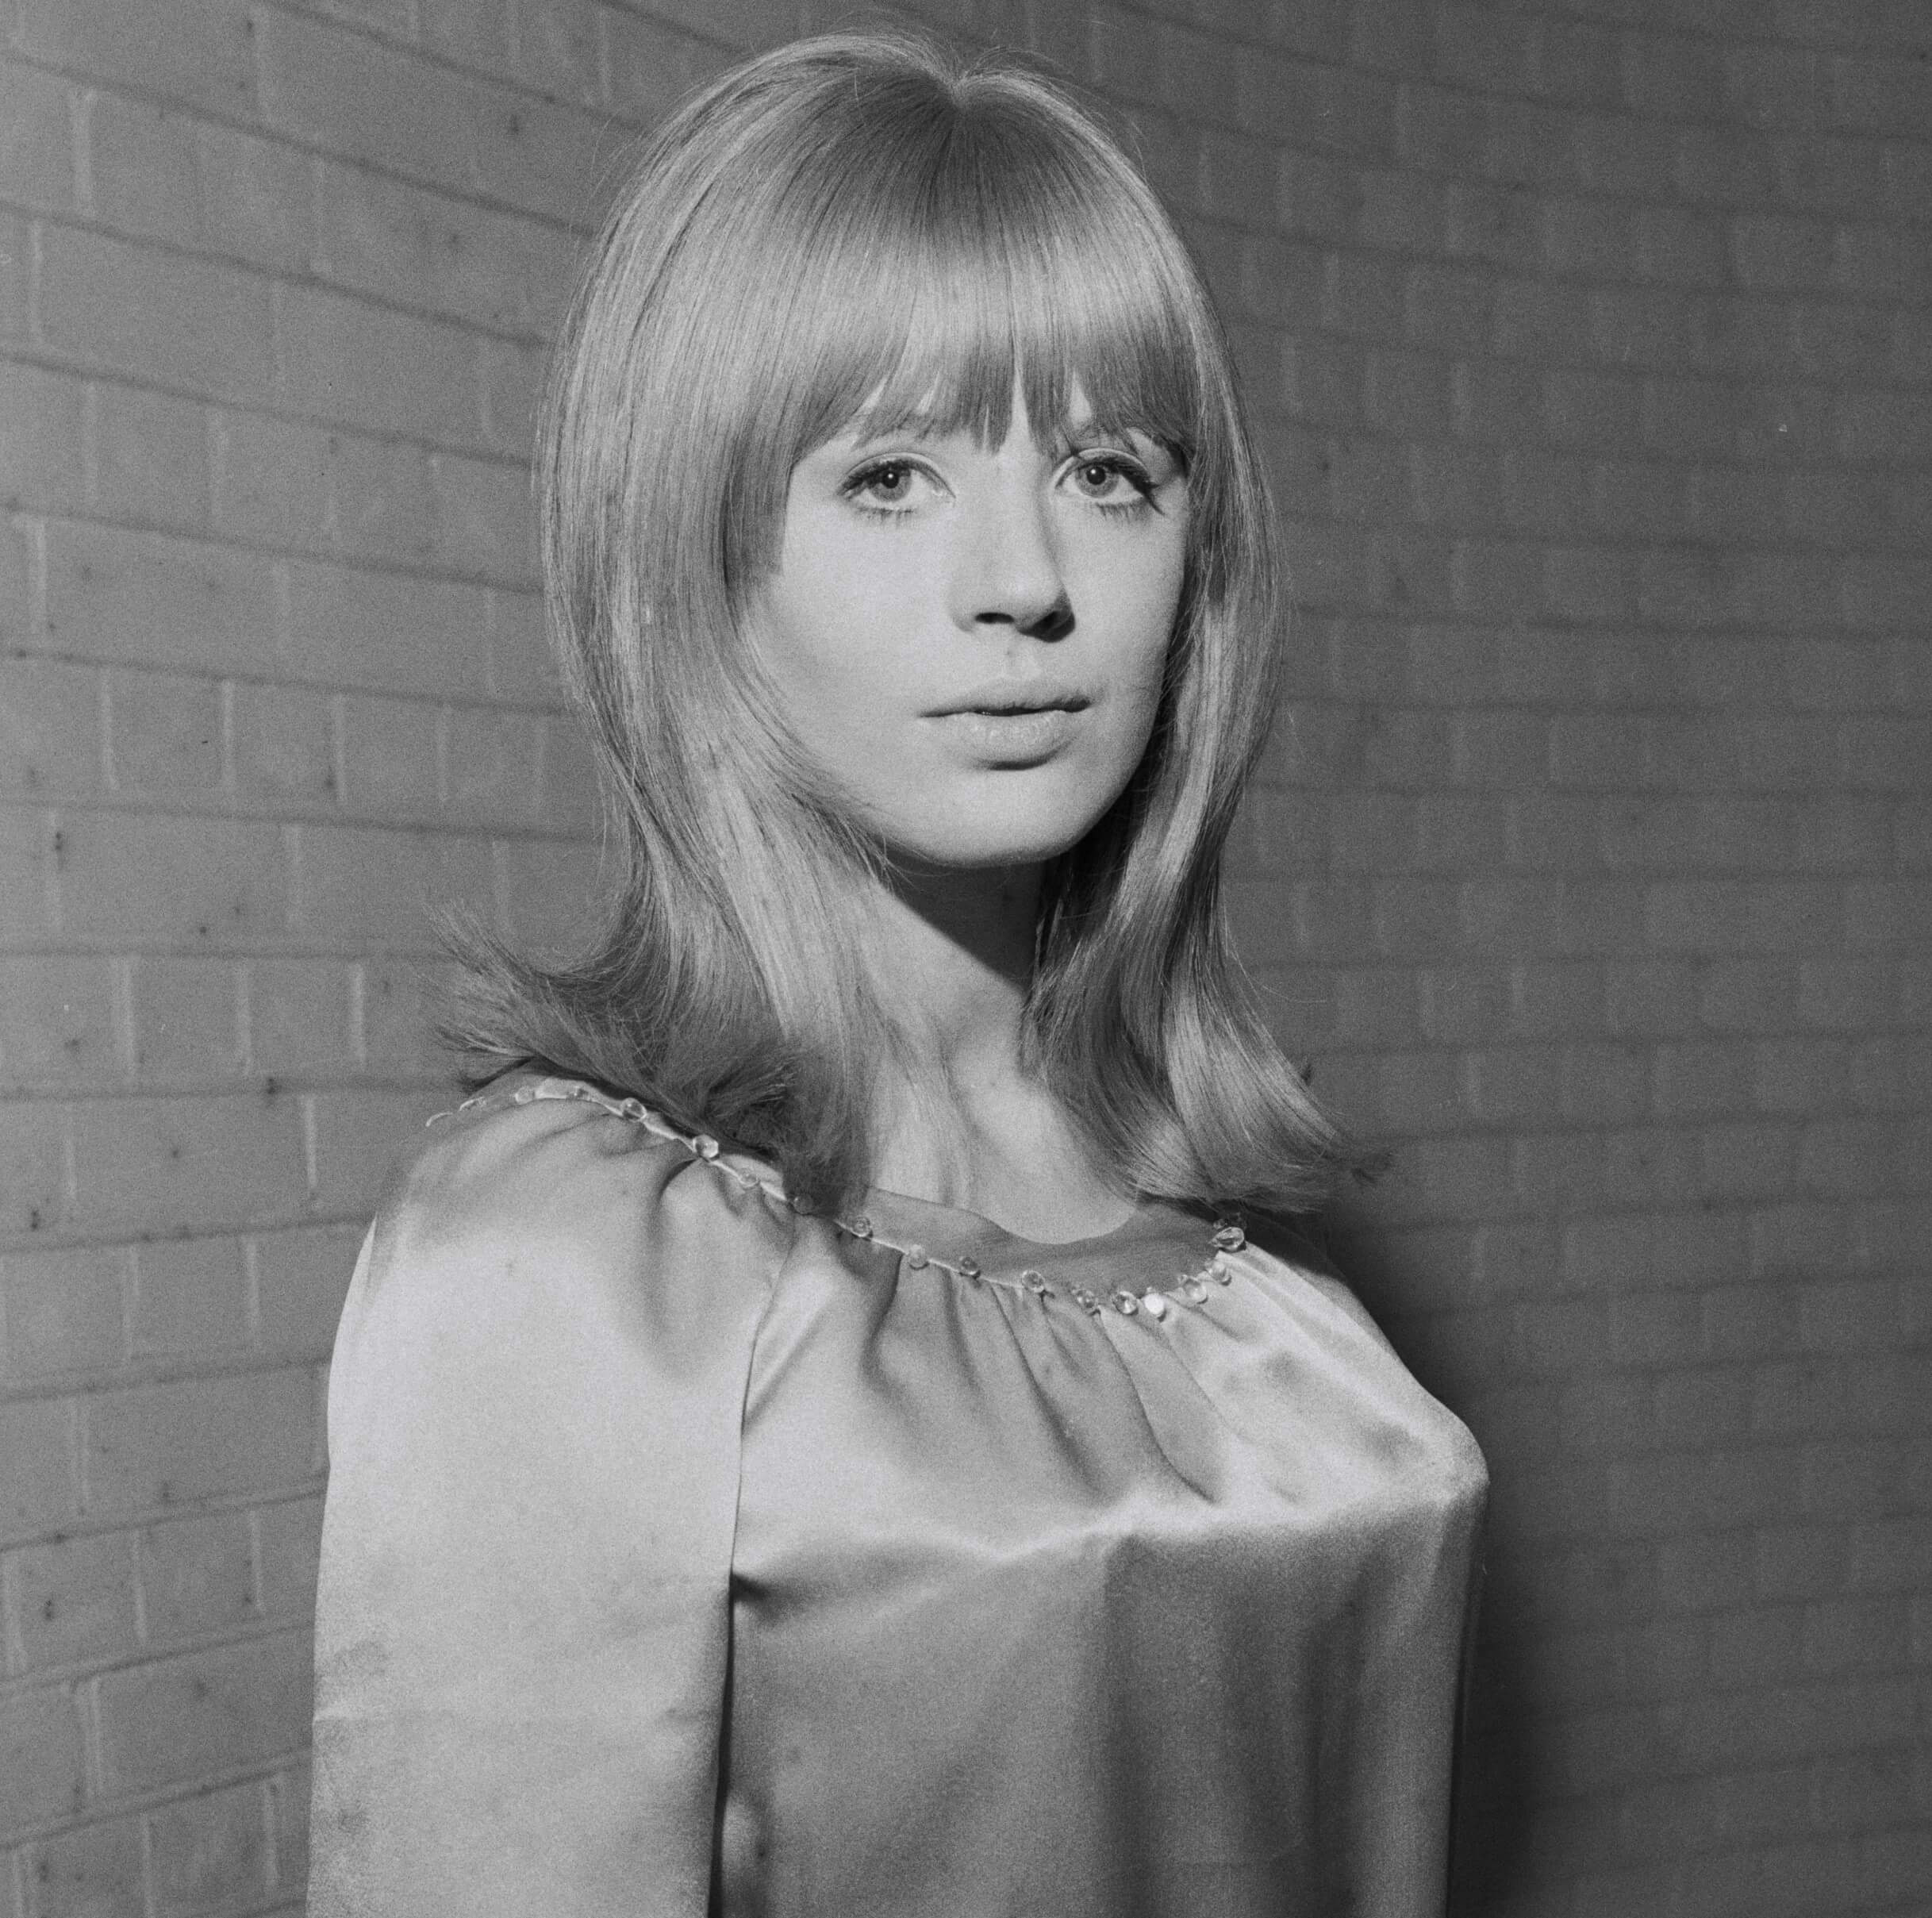 Marianne Faithfull in front of a brick wall